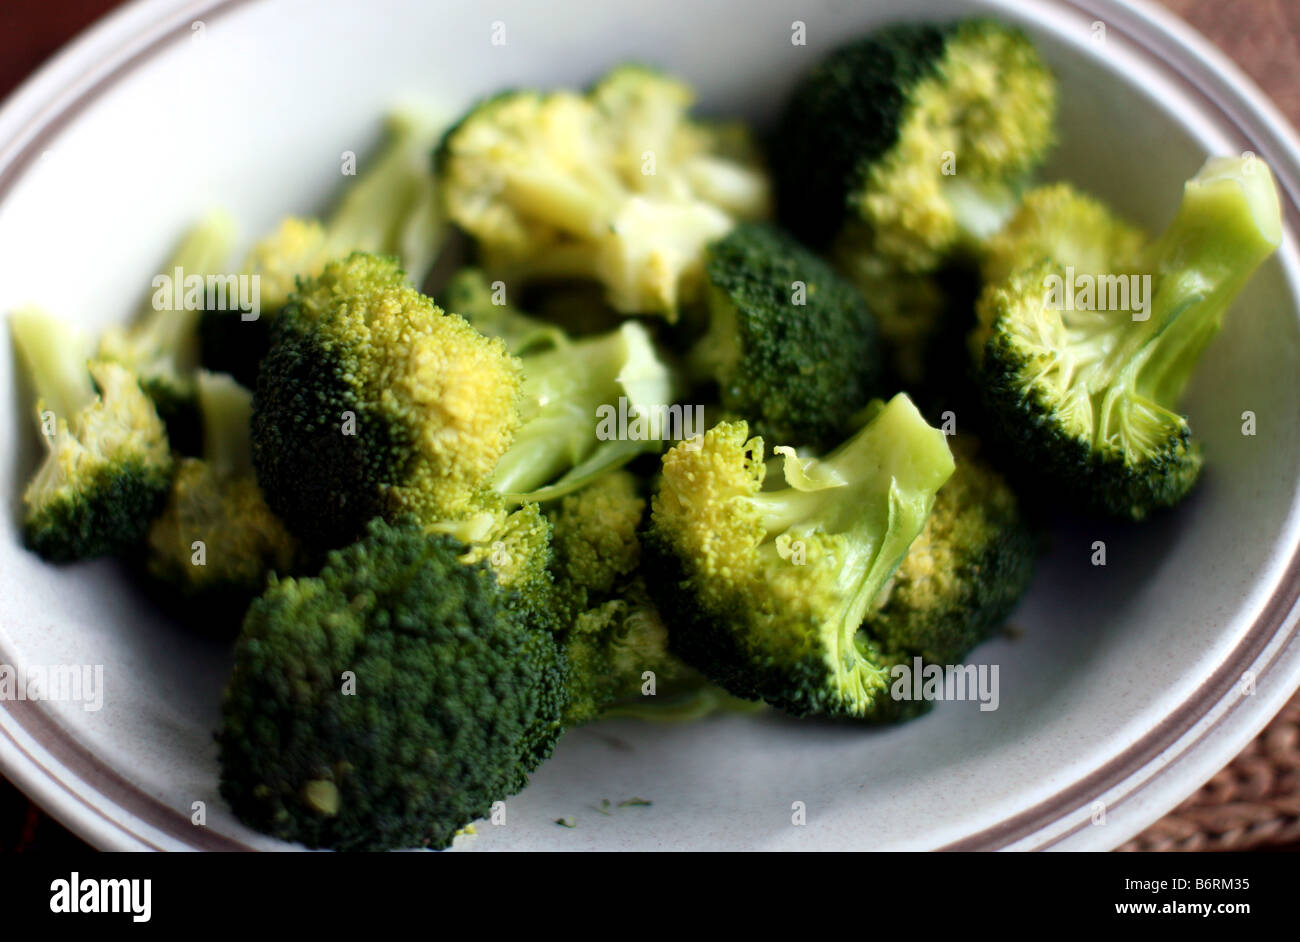 Cooked broccoli in a dish Stock Photo